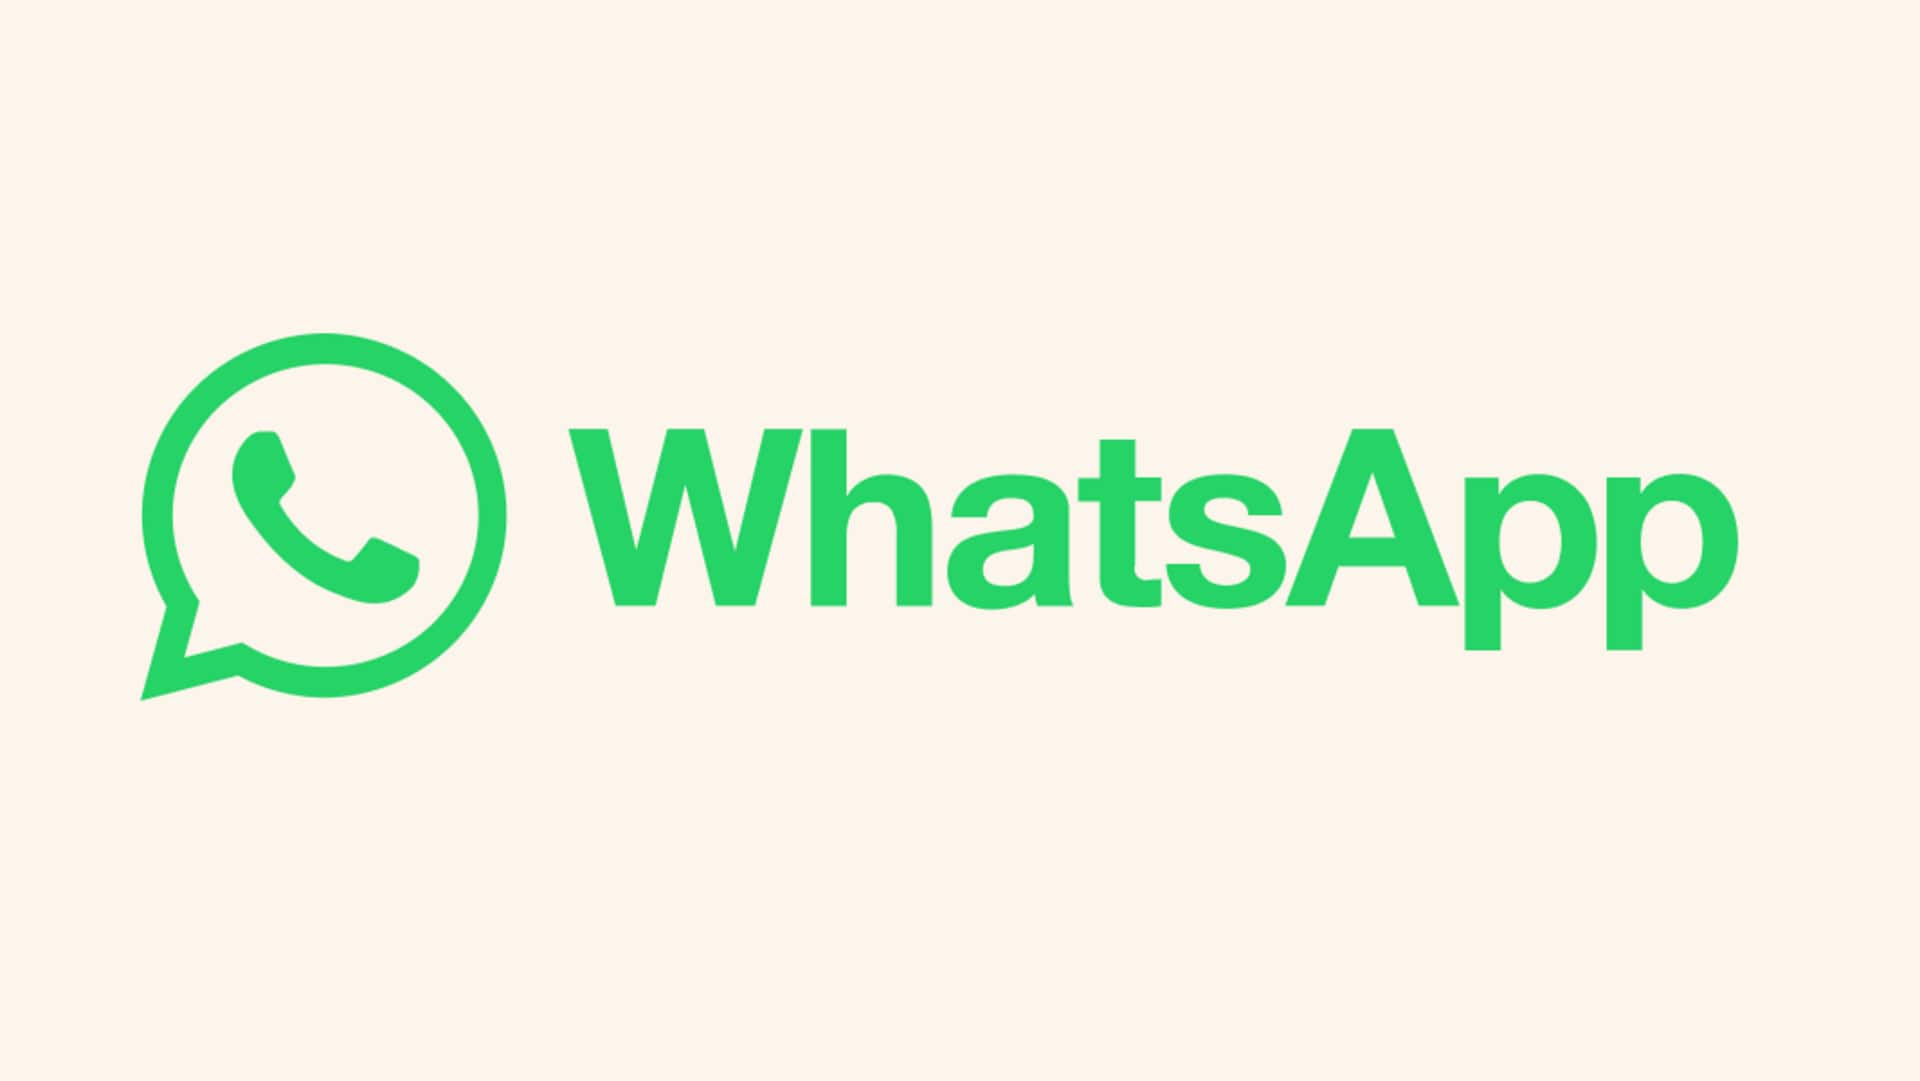 WhatsApp brings back tab-swiping feature in latest Android beta update